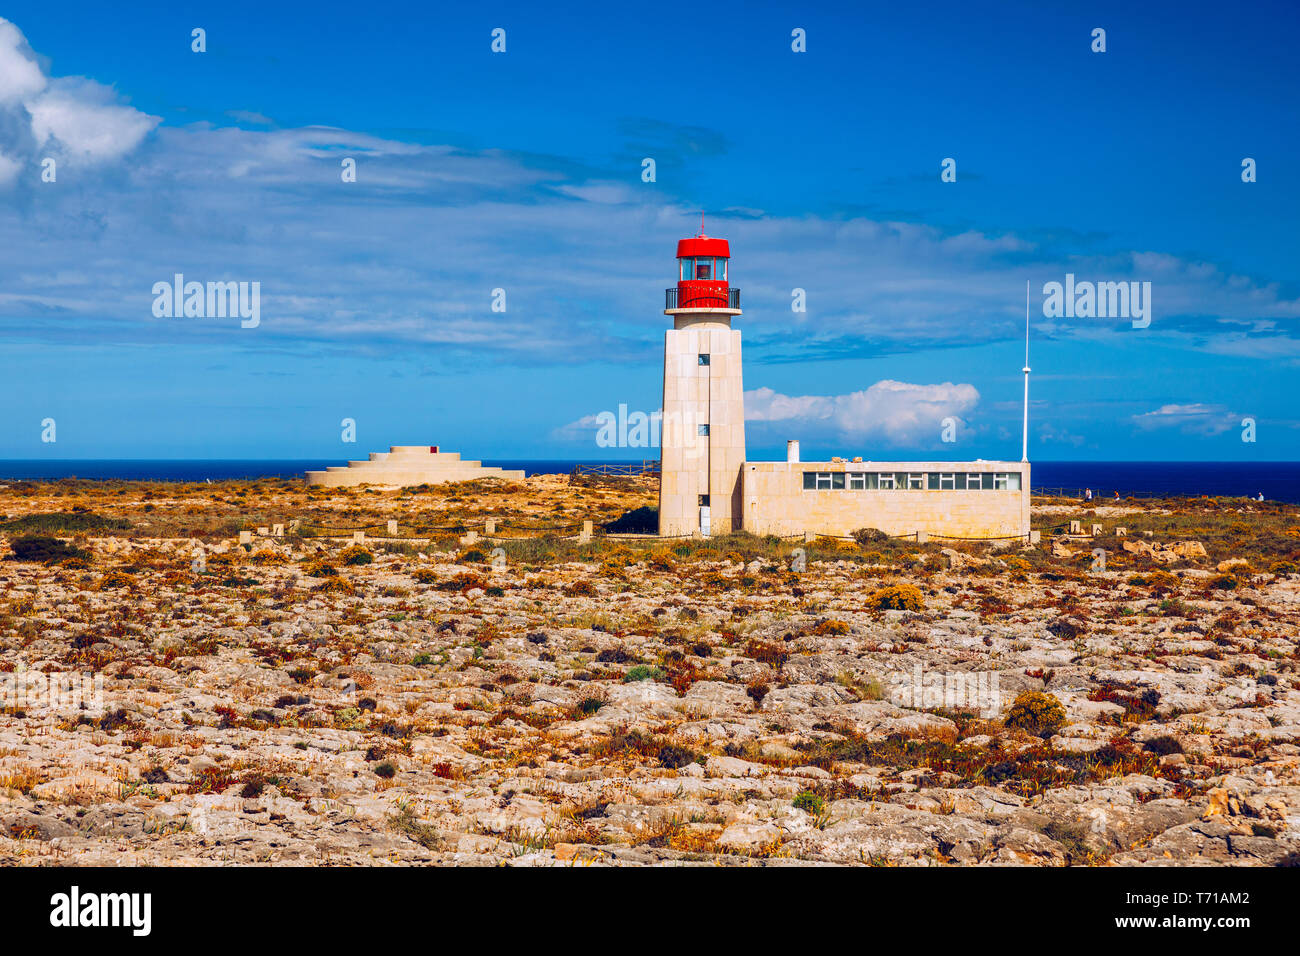 Lighthouse in Fortaleza de Sagres, Portugal, Europe on a cliff. This beautiful ancient architecture is used for navigation by ships and boats. Great d Stock Photo